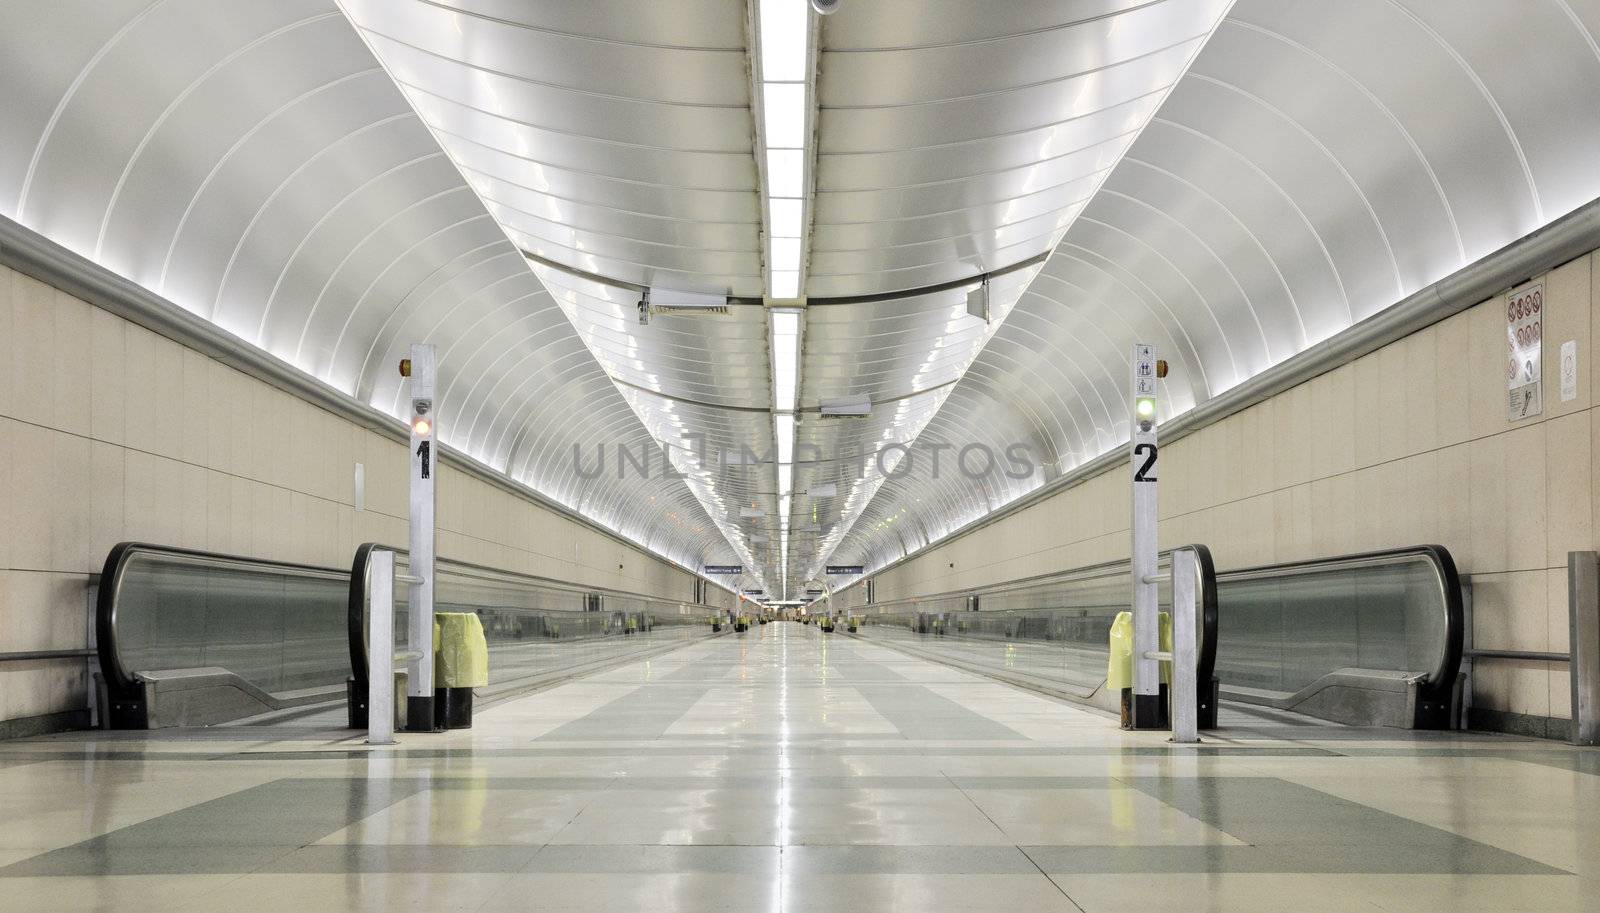 An endless and futuristic corridor in a train station